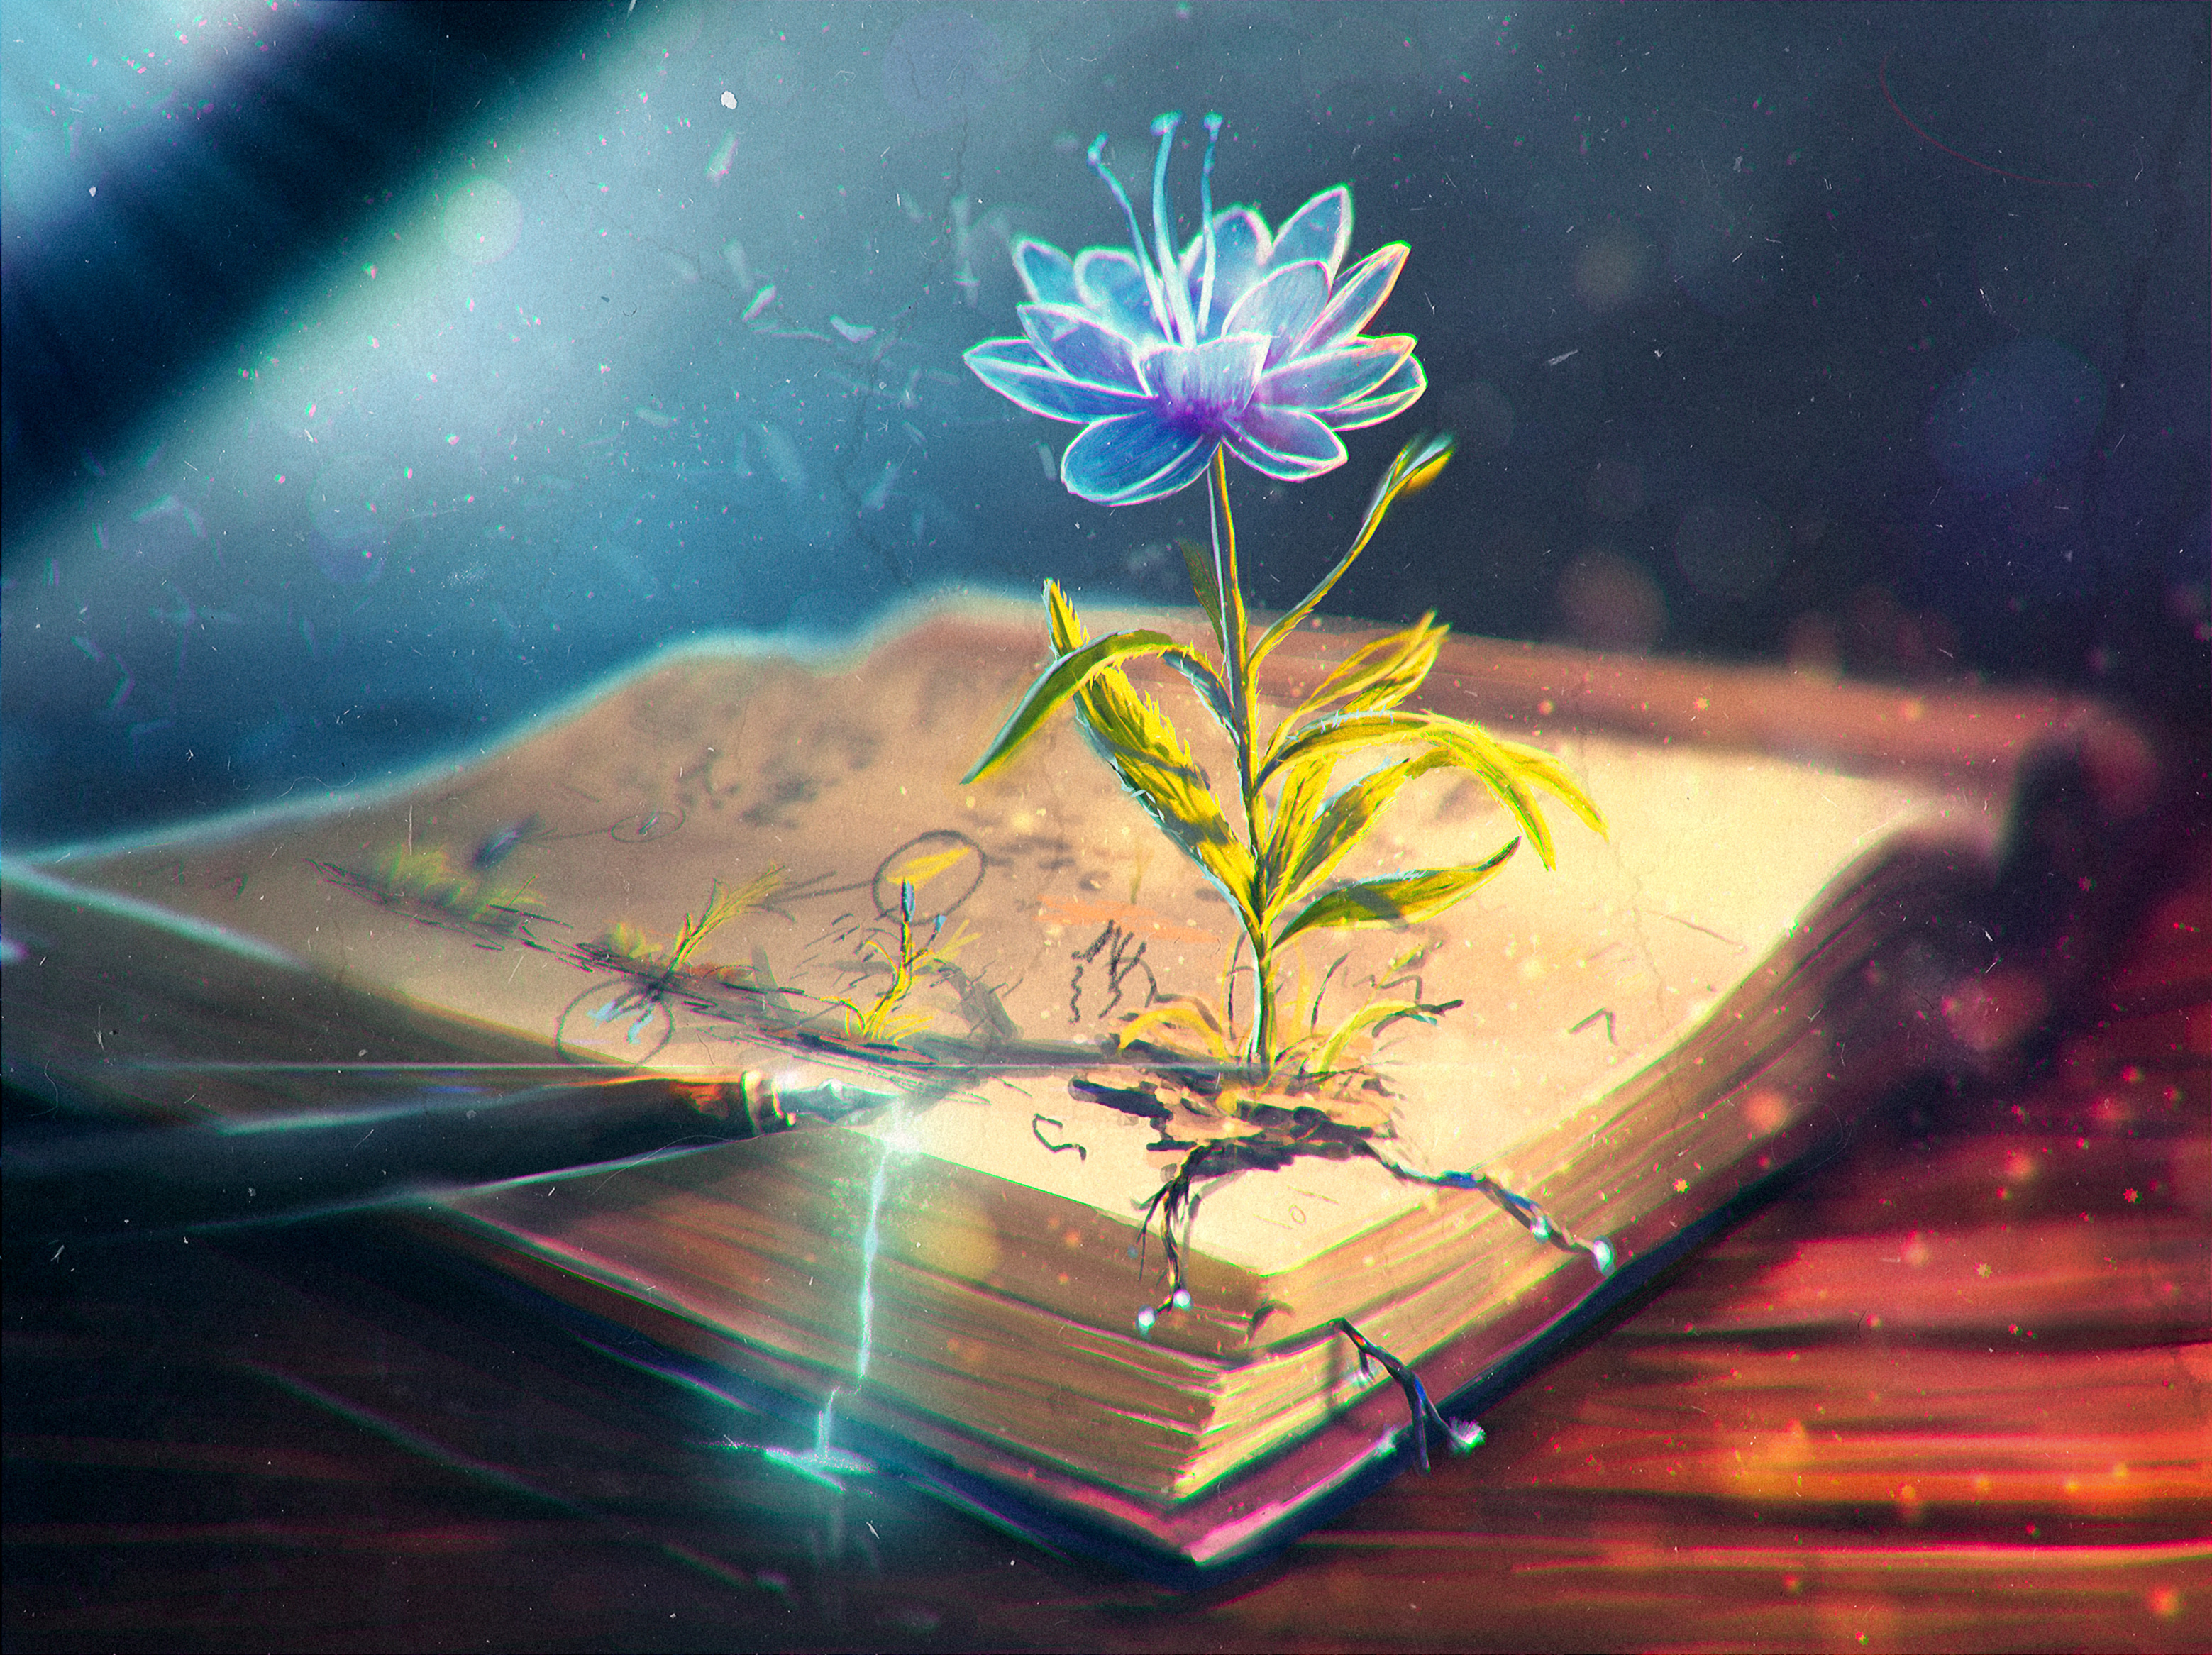 pen, flower, abstract, book, feather 1080p